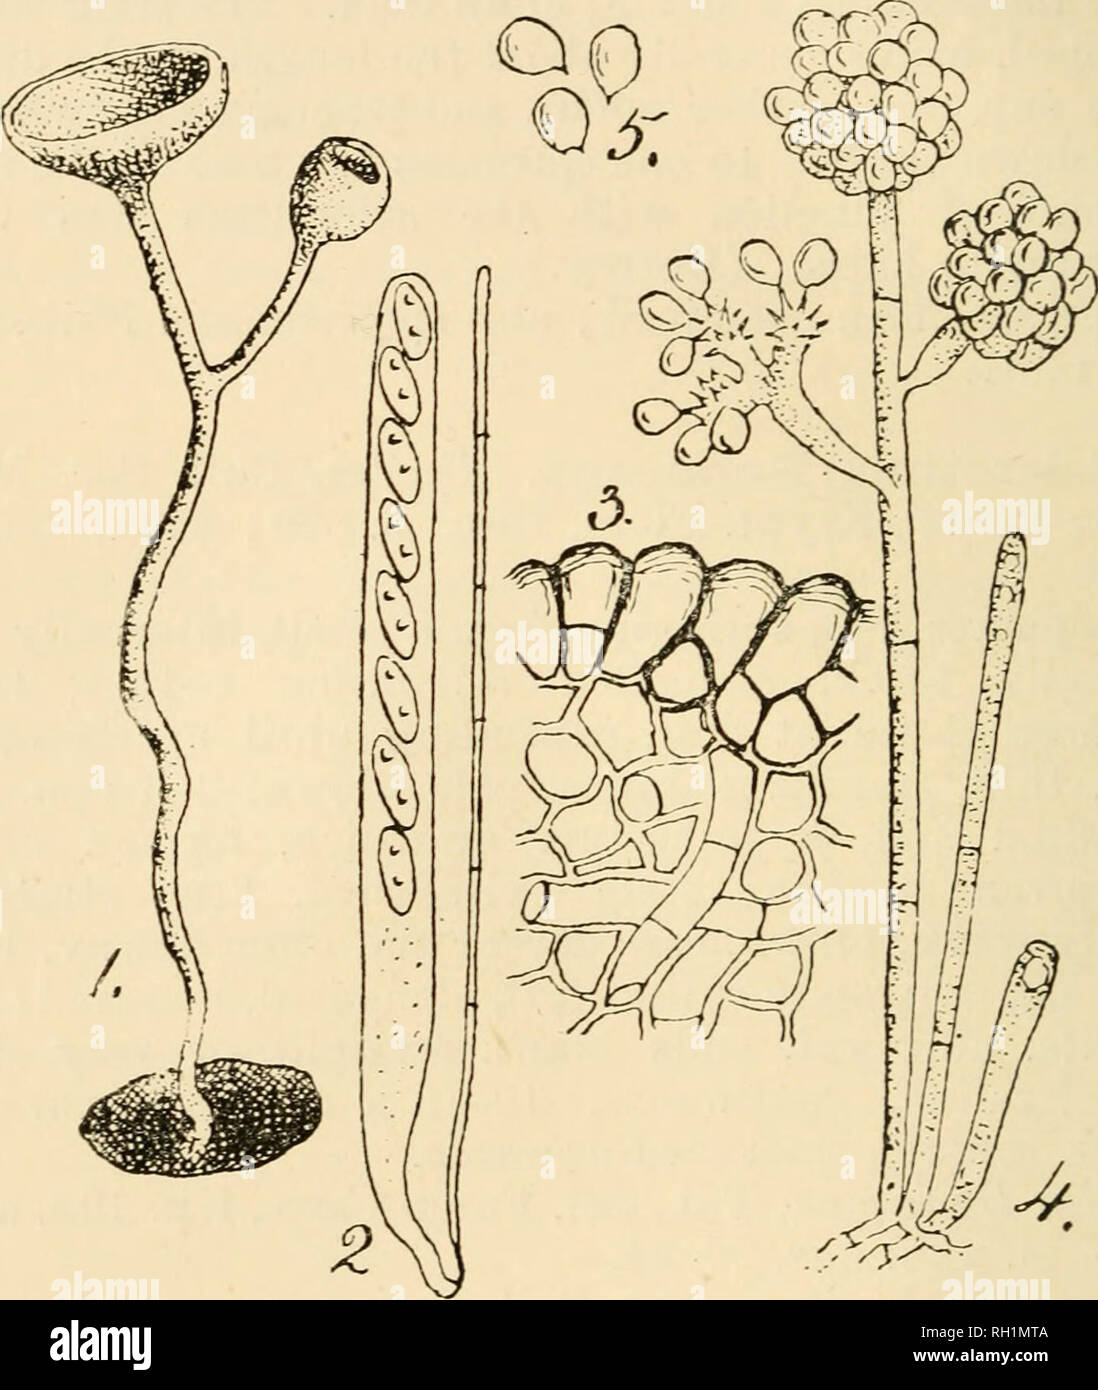 . British fungus-flora. A classified text-book of mycology. Fungi -- Great Britain. 284 FUNG US-FLORA. Sclerotinia bulborum. Behm, Krypt.-Flora, Disc, p. 819; Sacc, Syll., viii. n. 802; Mass., in Gard. Chron., Aug. 11th, 1894, p. 1894, with fig. Ascophores 1-3 in number, springing from an irregular sclerotium which is at first white, then blackish externally,. Fig. 1, Sclerotinia bulborum, Relim, x 10 ;—Fig. 2, ascus and paraphysis of same, X 400;—Fig. 3, section of portion of a sclerotium, x 400;— Fig. 4, Botrytis form of the fungus, x 250;—Fig. 5, conidia of Botrytis stage, x 400. 8-12 mm. d Stock Photo